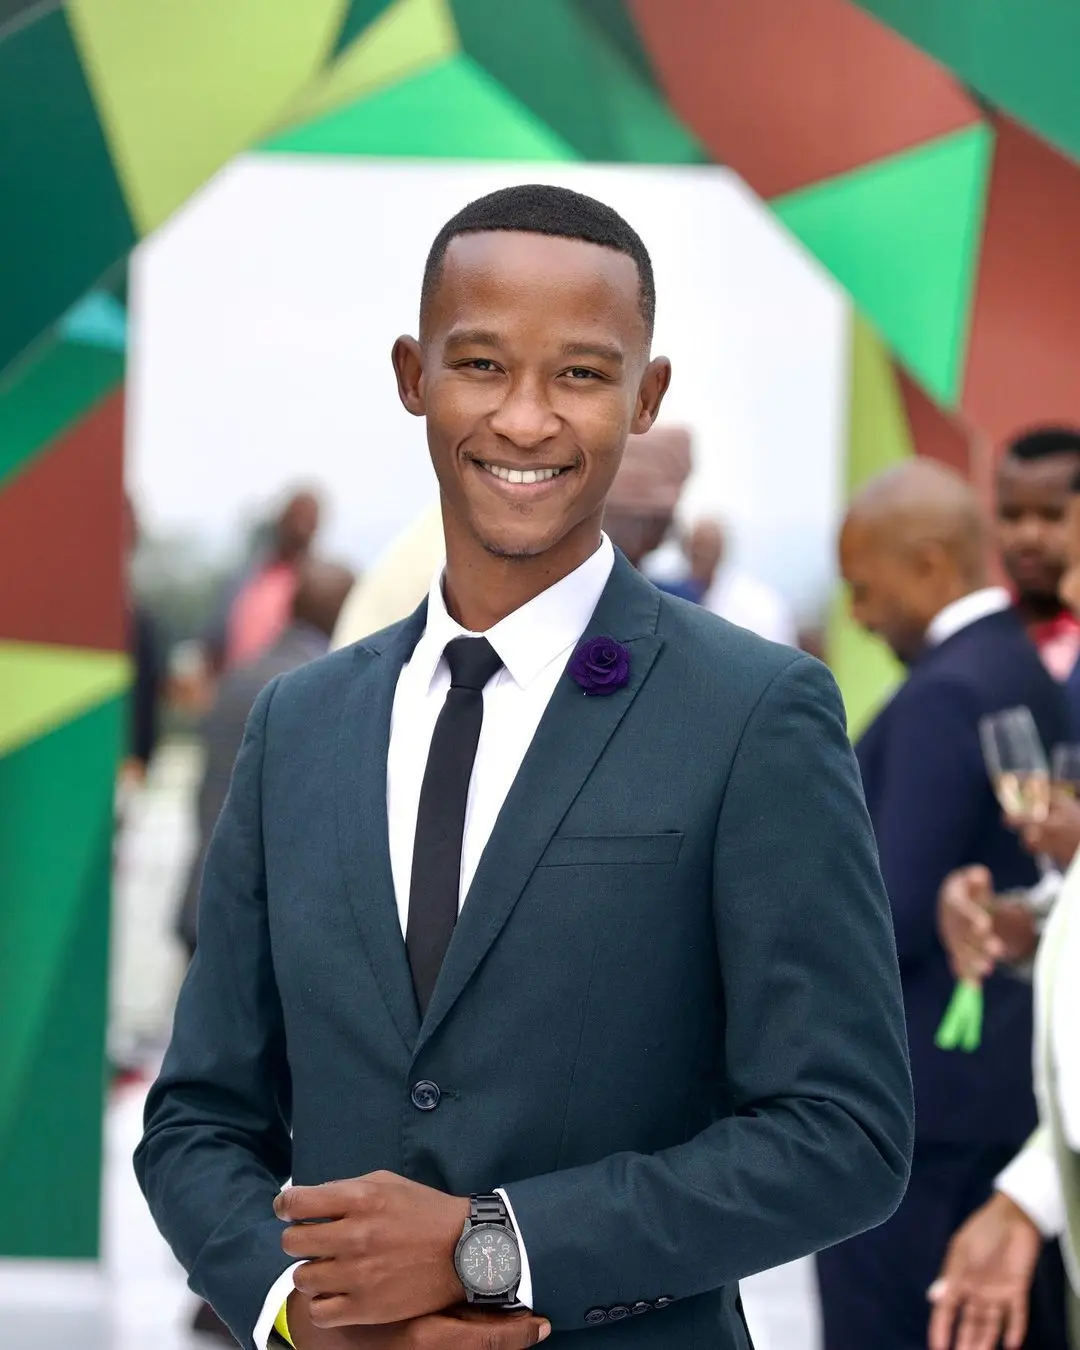 Katlego Maboe’s heart-melting Birthday message to his mom